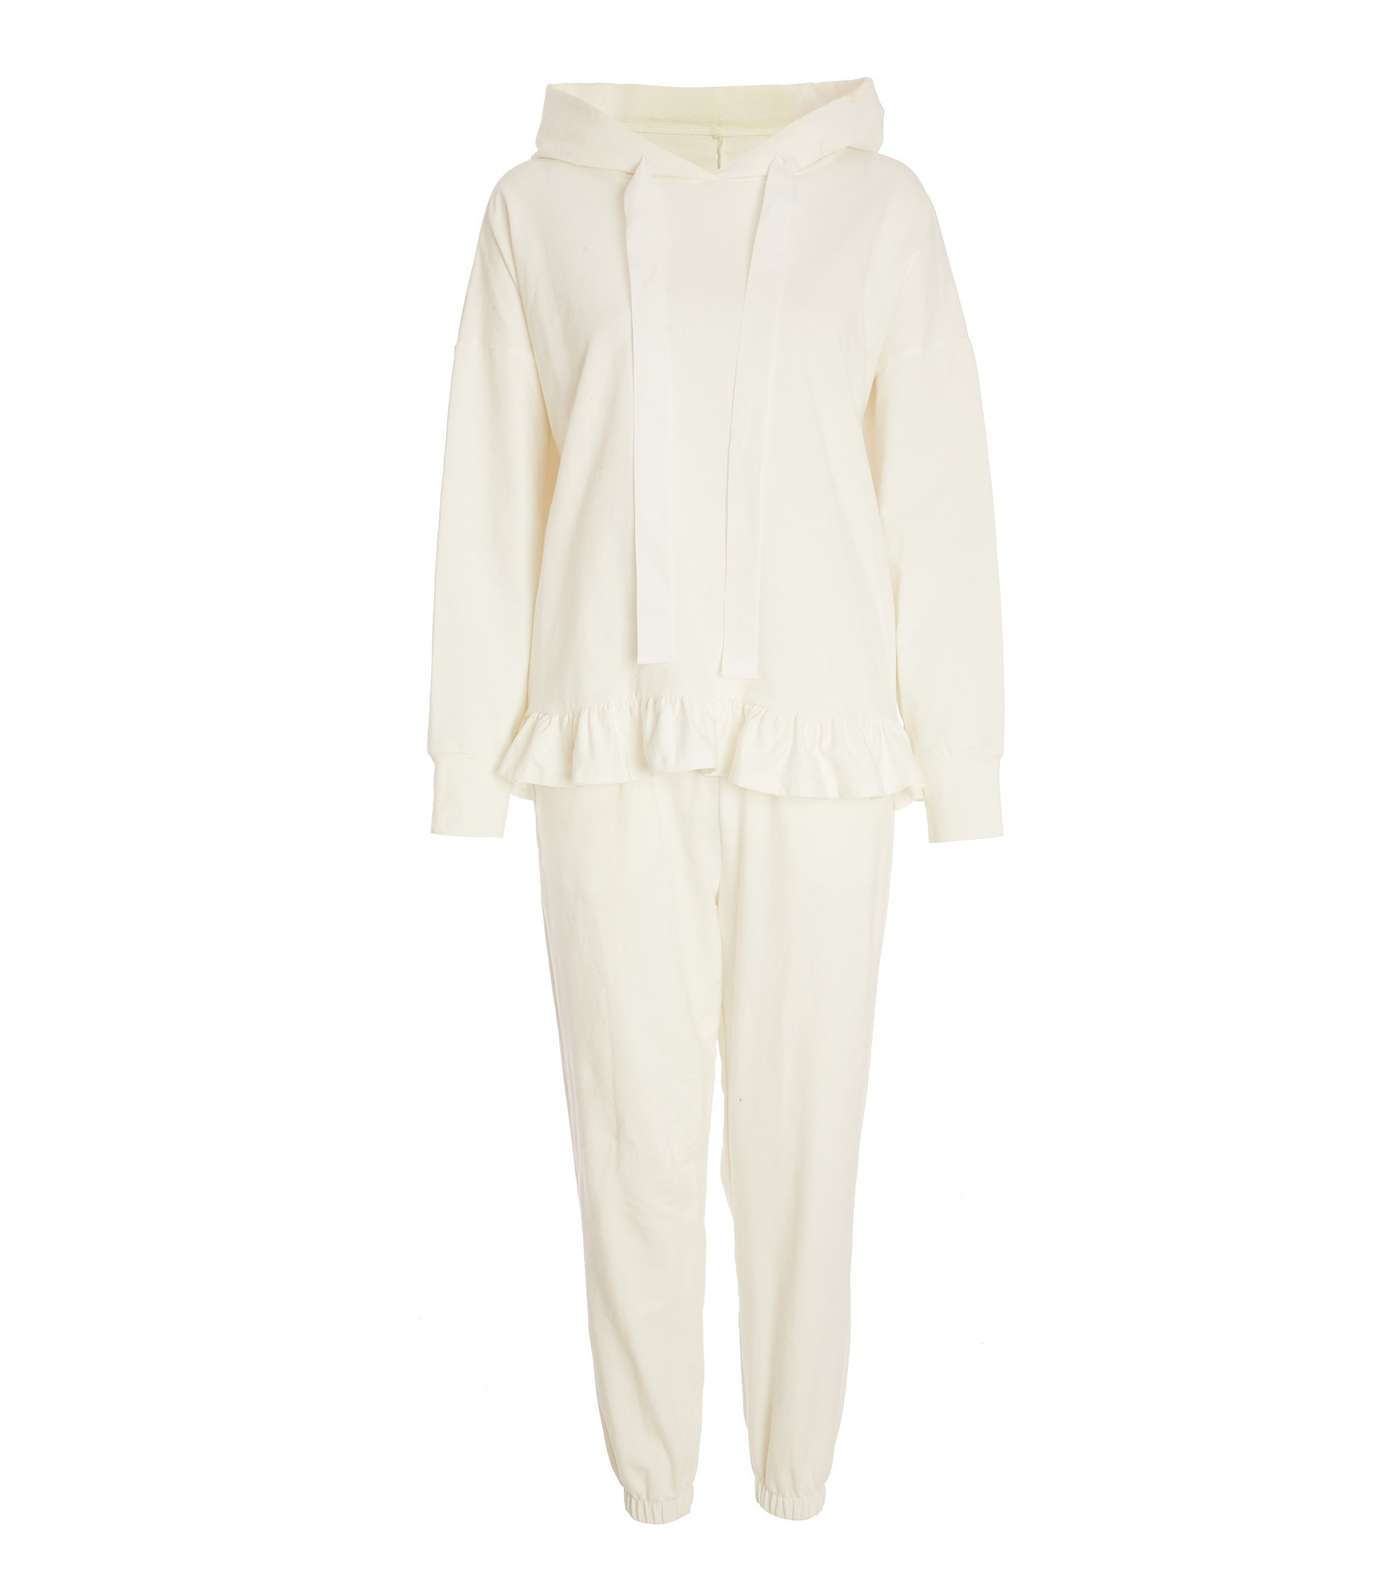 QUIZ Cream Frill Hoodie and Joggers Set Image 4